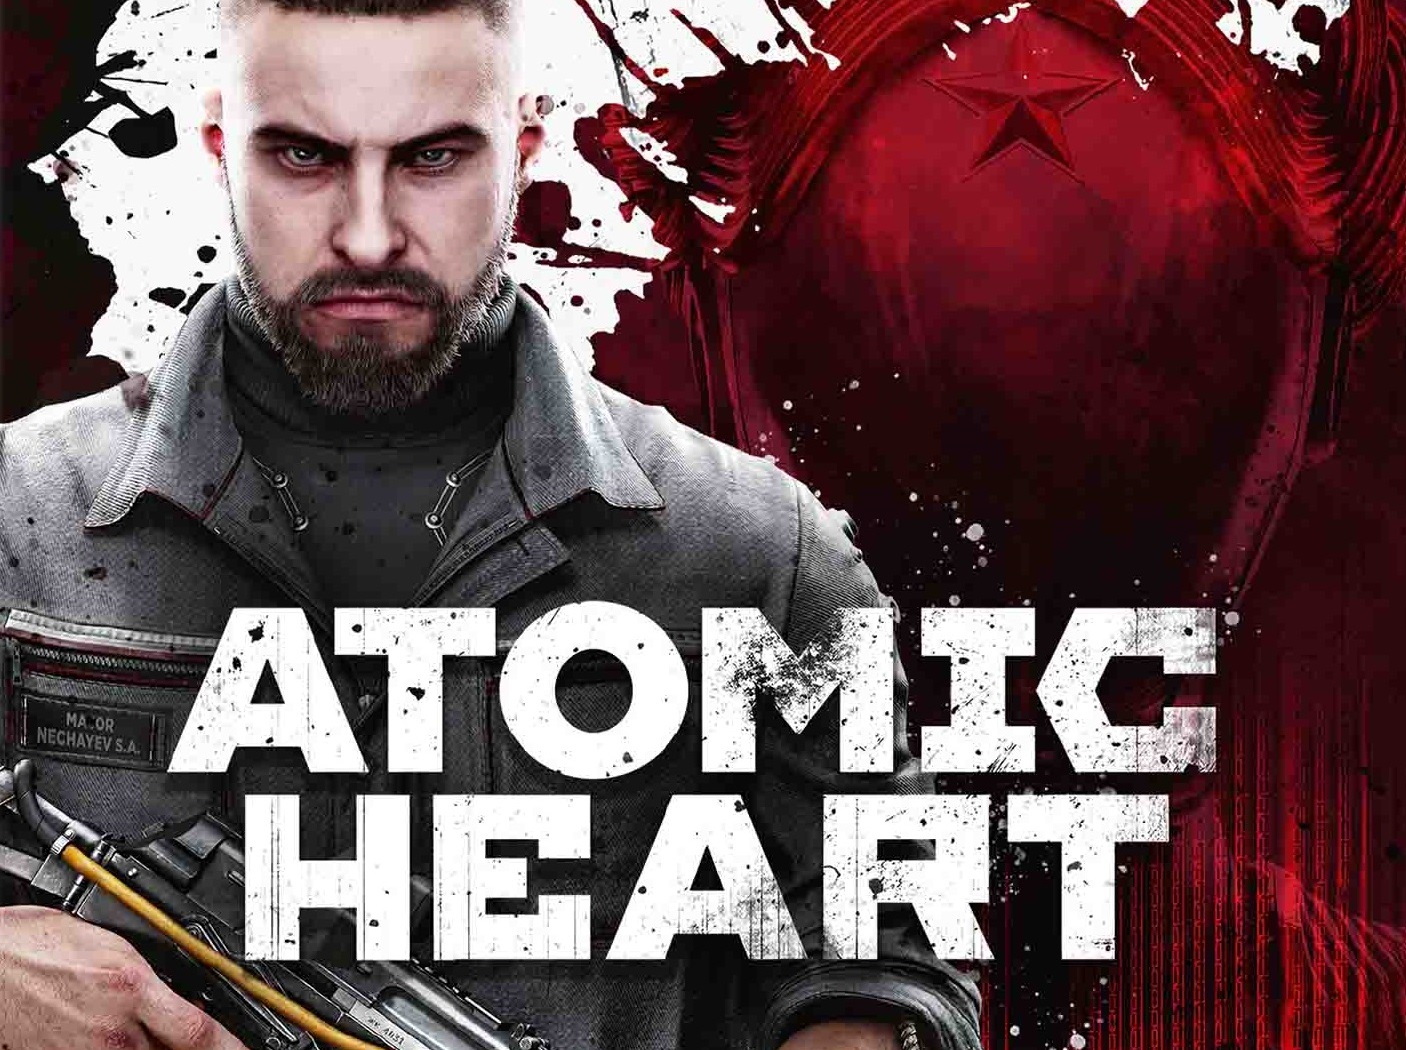 Atomic Heart Review Scores